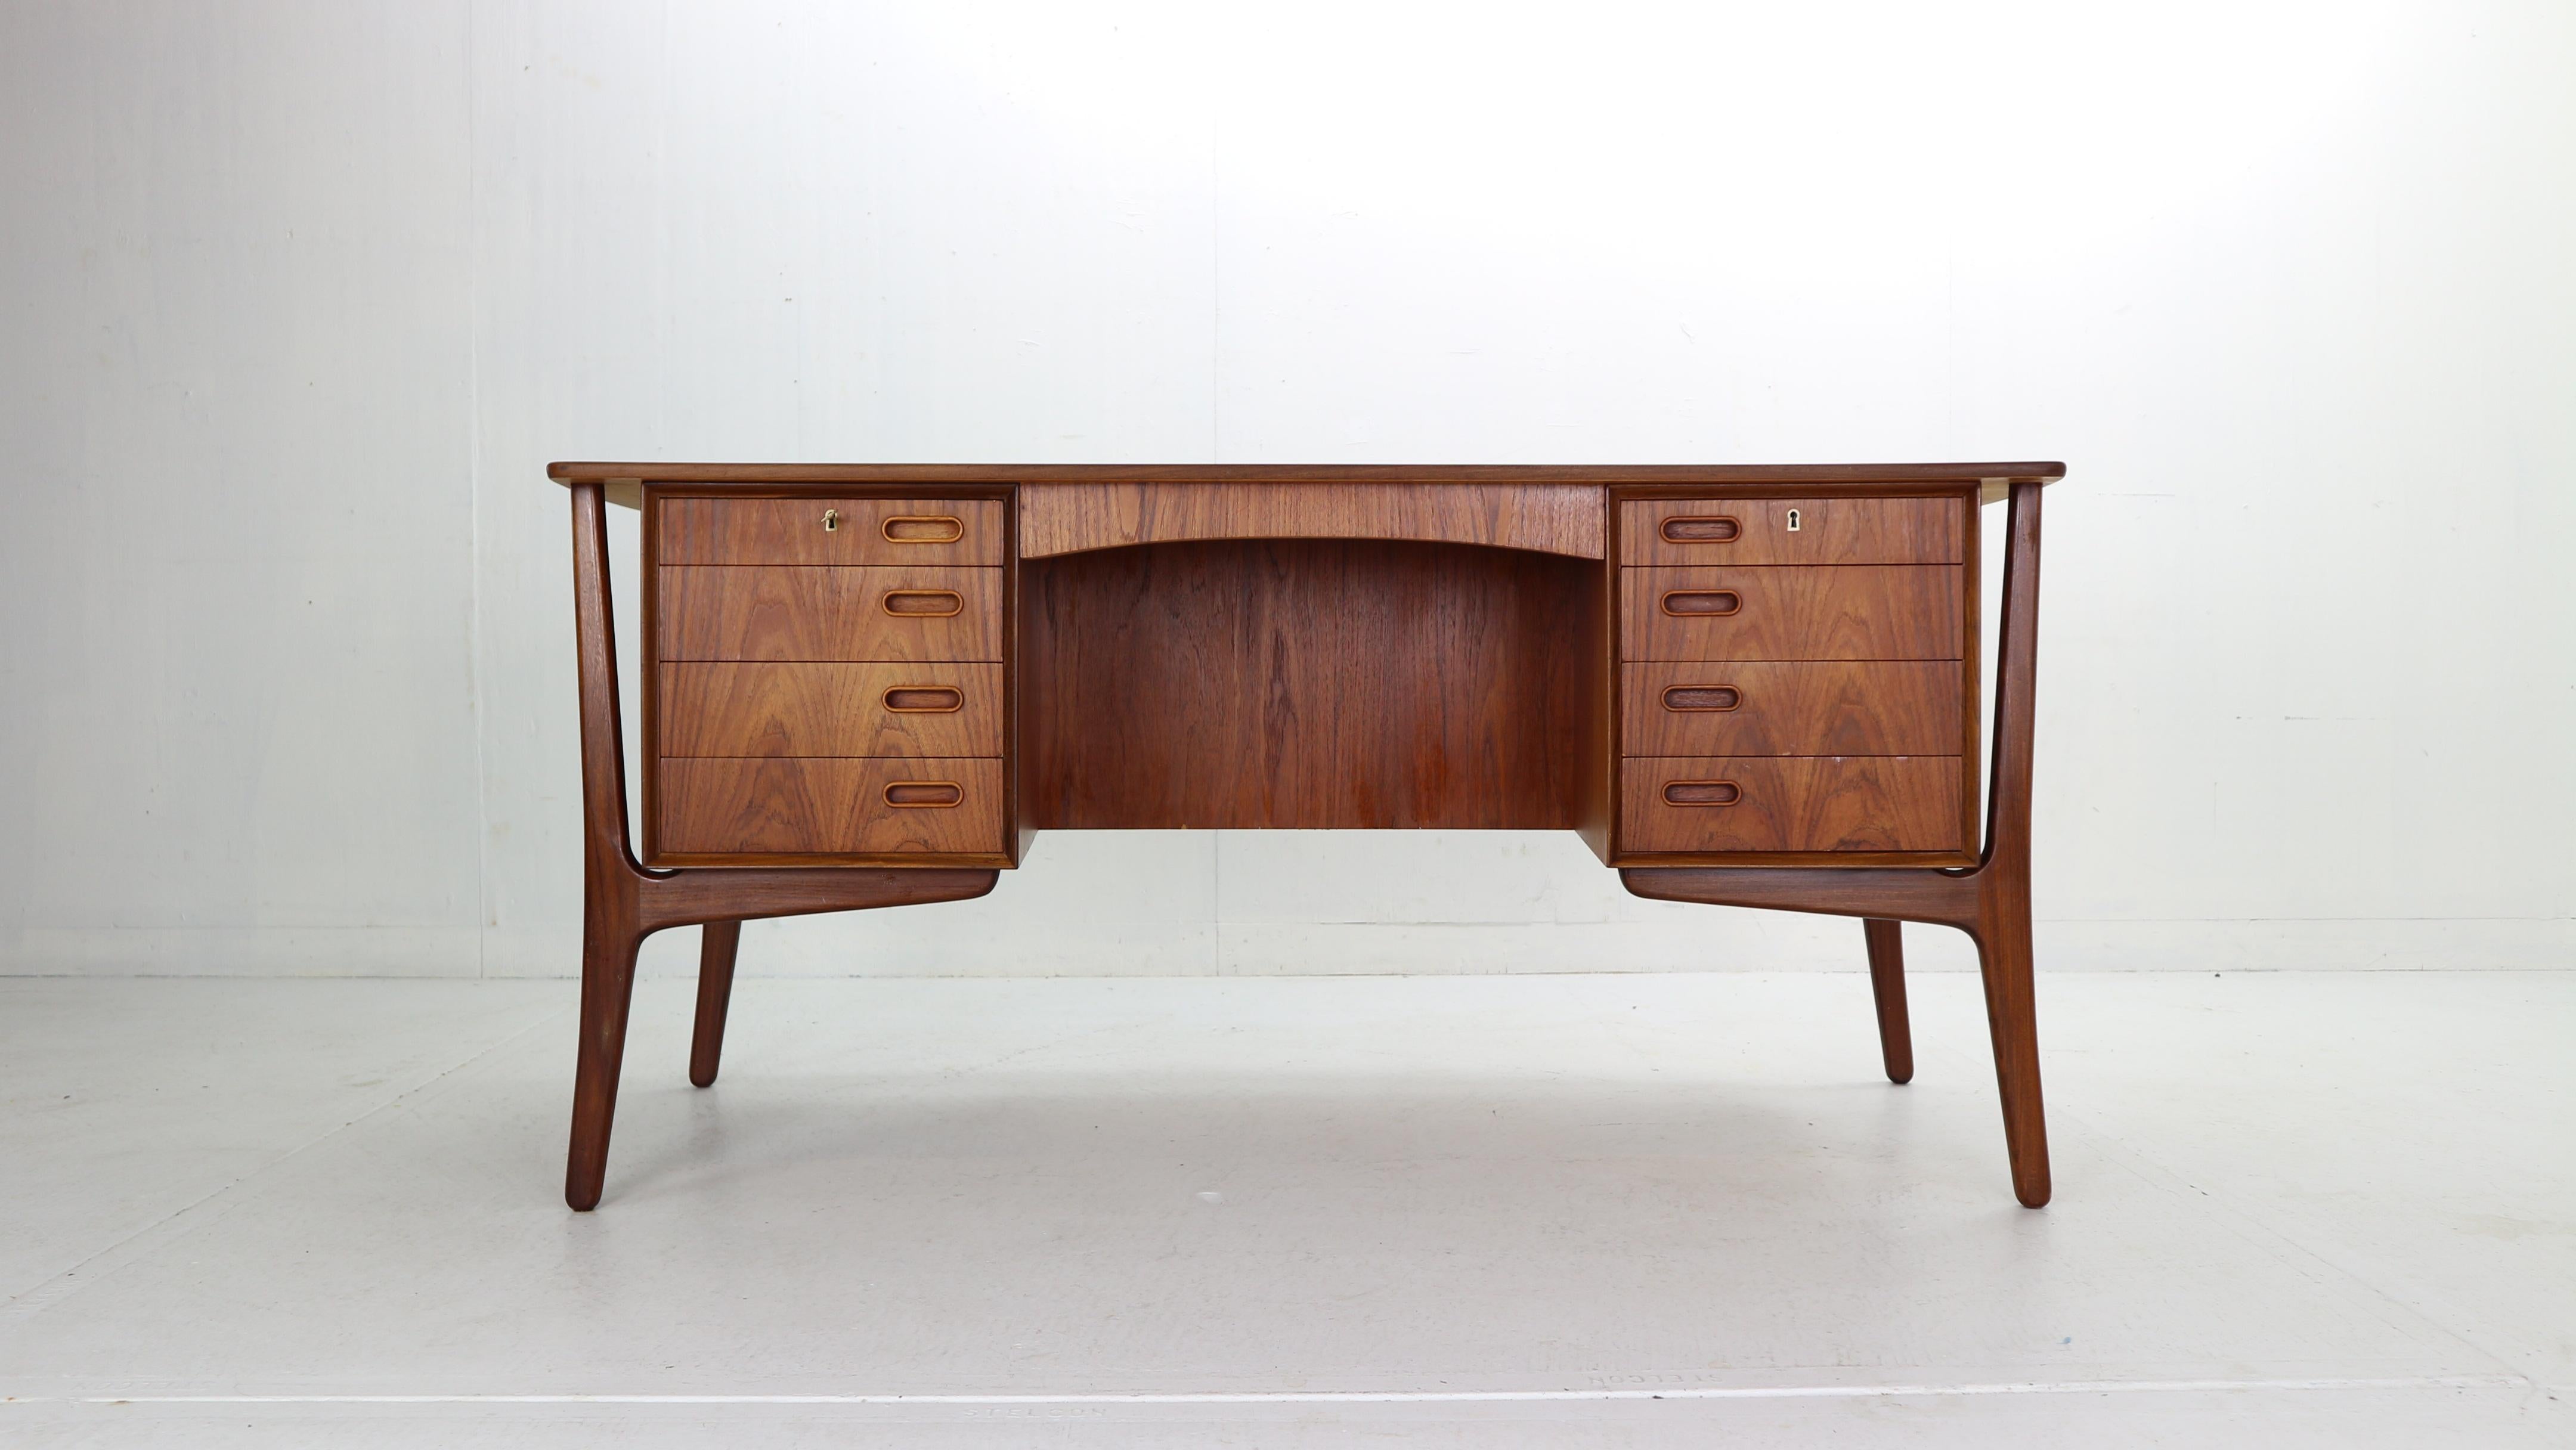 Exclusive Scandinavian Modern large desk designed by Svend Madsen and manufactured by HP Hansen in Denmark, 1960s period.
This beautiful desk features a bowed large top with vibrant teak wood grain and a raised lip edge. The desk offers on its